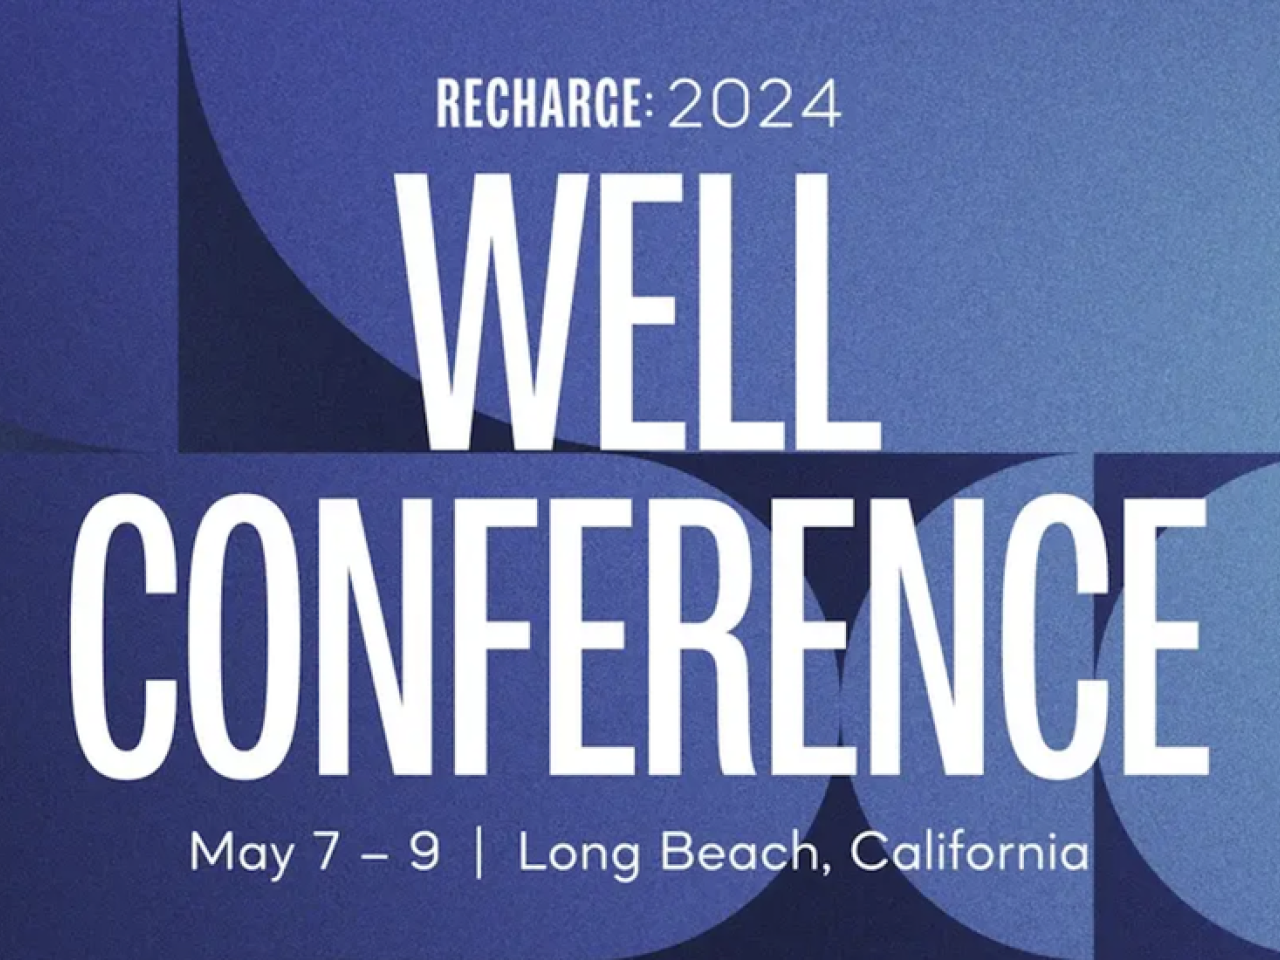 RECHARGE: 2024 WELL CONFERENCE banner image